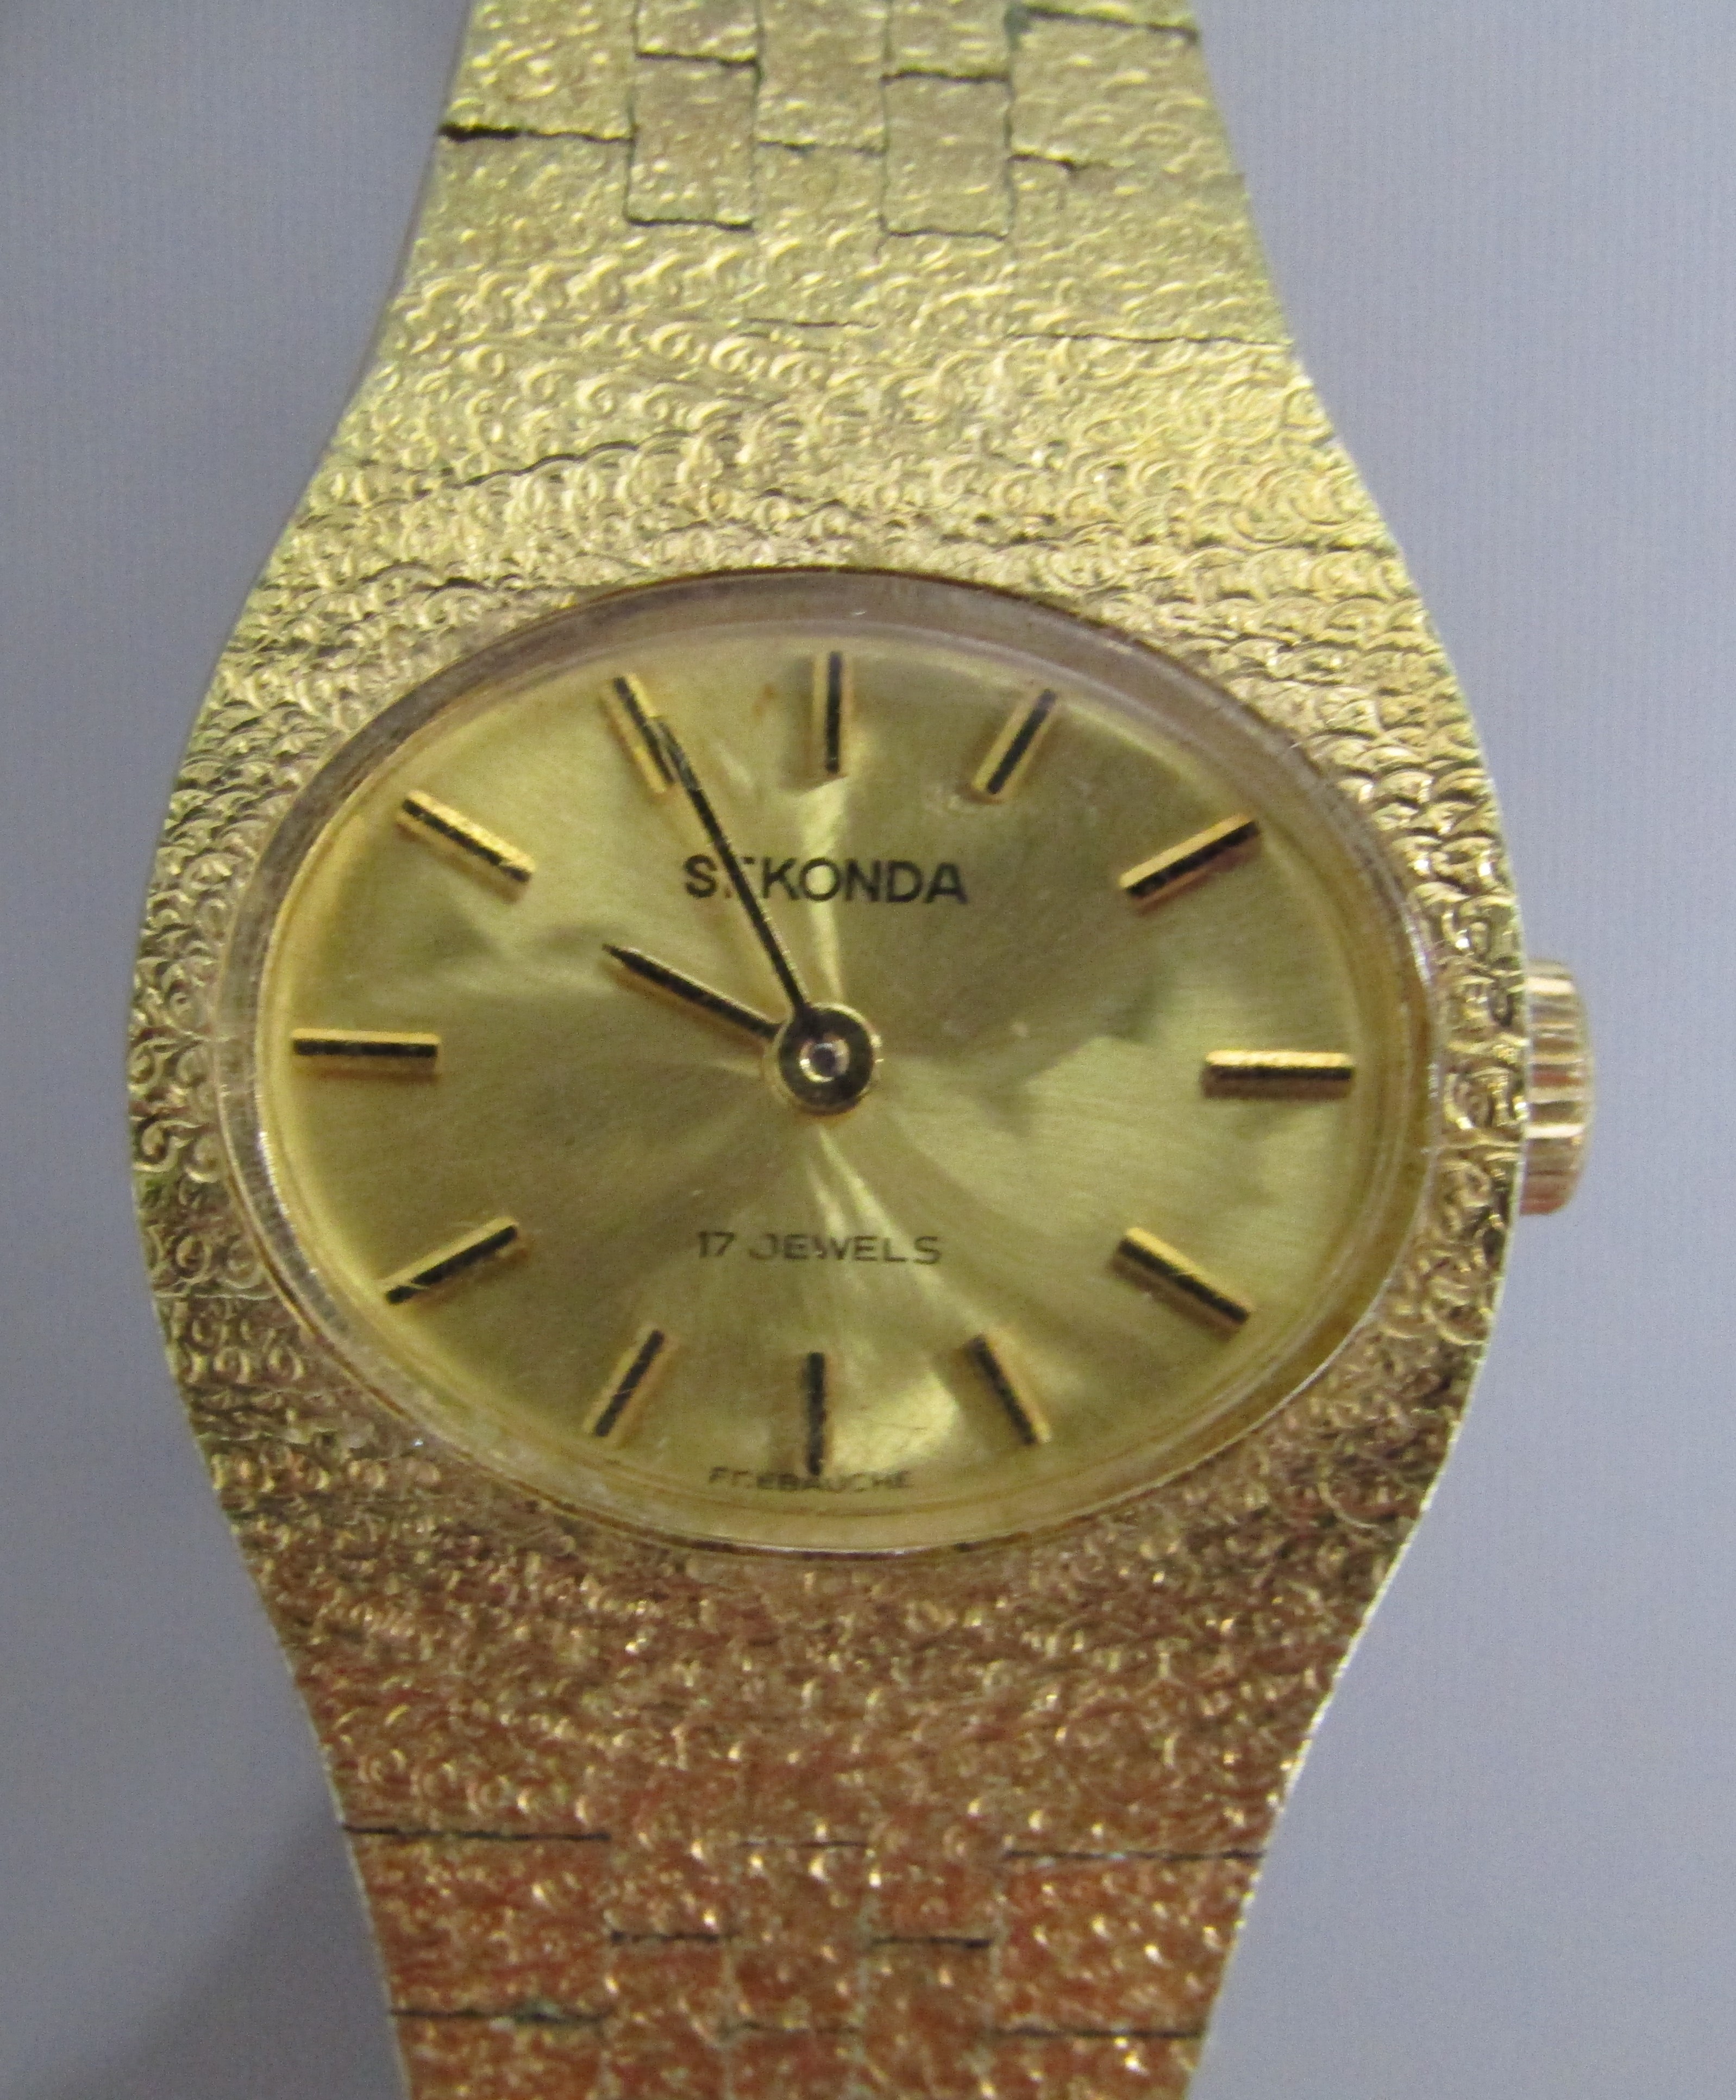 Ladies watches includes Sekonda, Accurist and Excalibur also a men's Reflex watch and Smiths and - Image 6 of 9